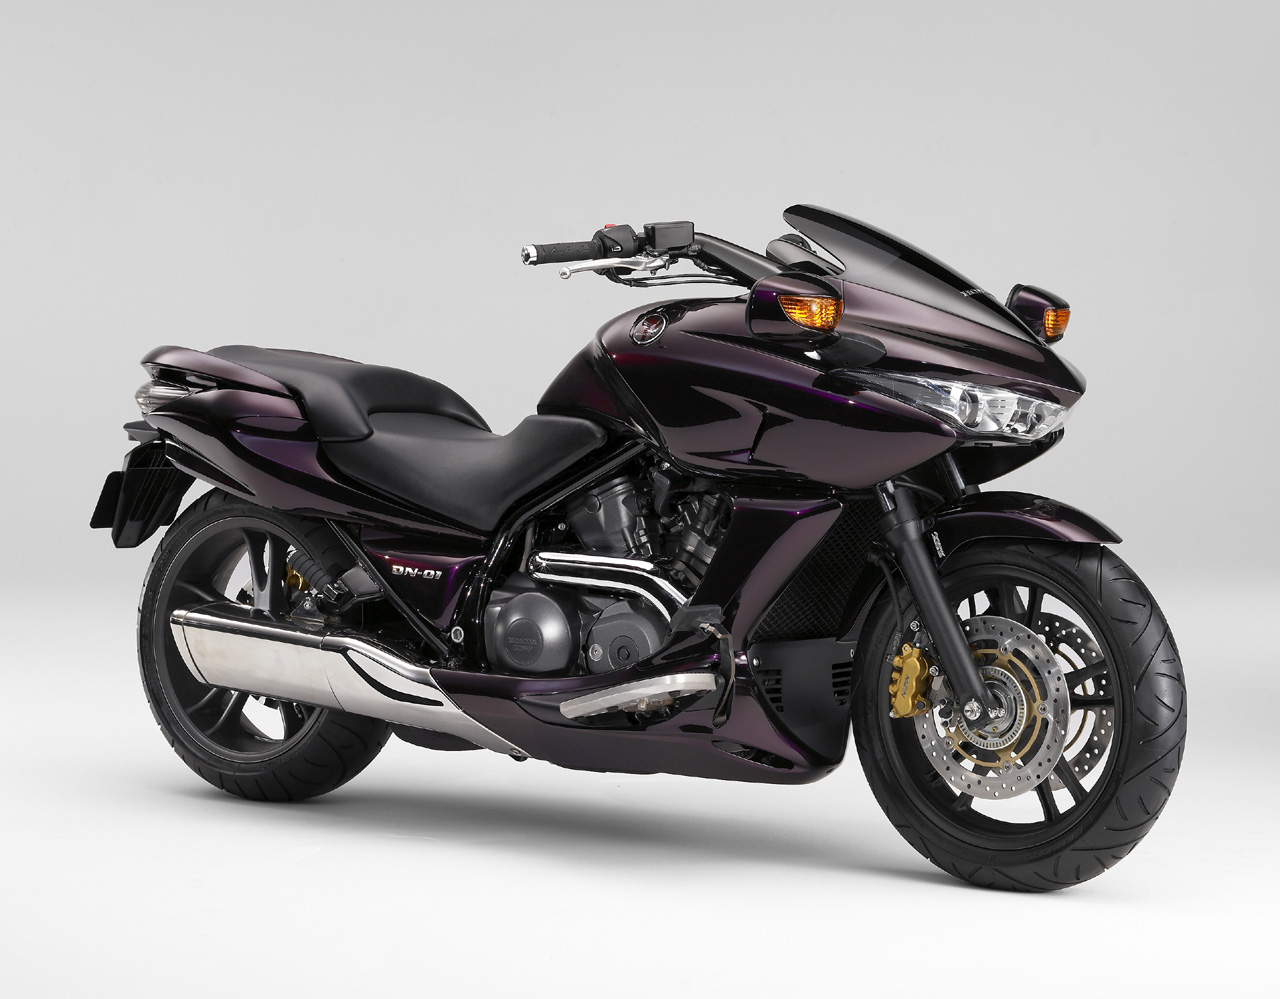  motorcycles 2011 Honda motorcycles models pictures and wallpapers